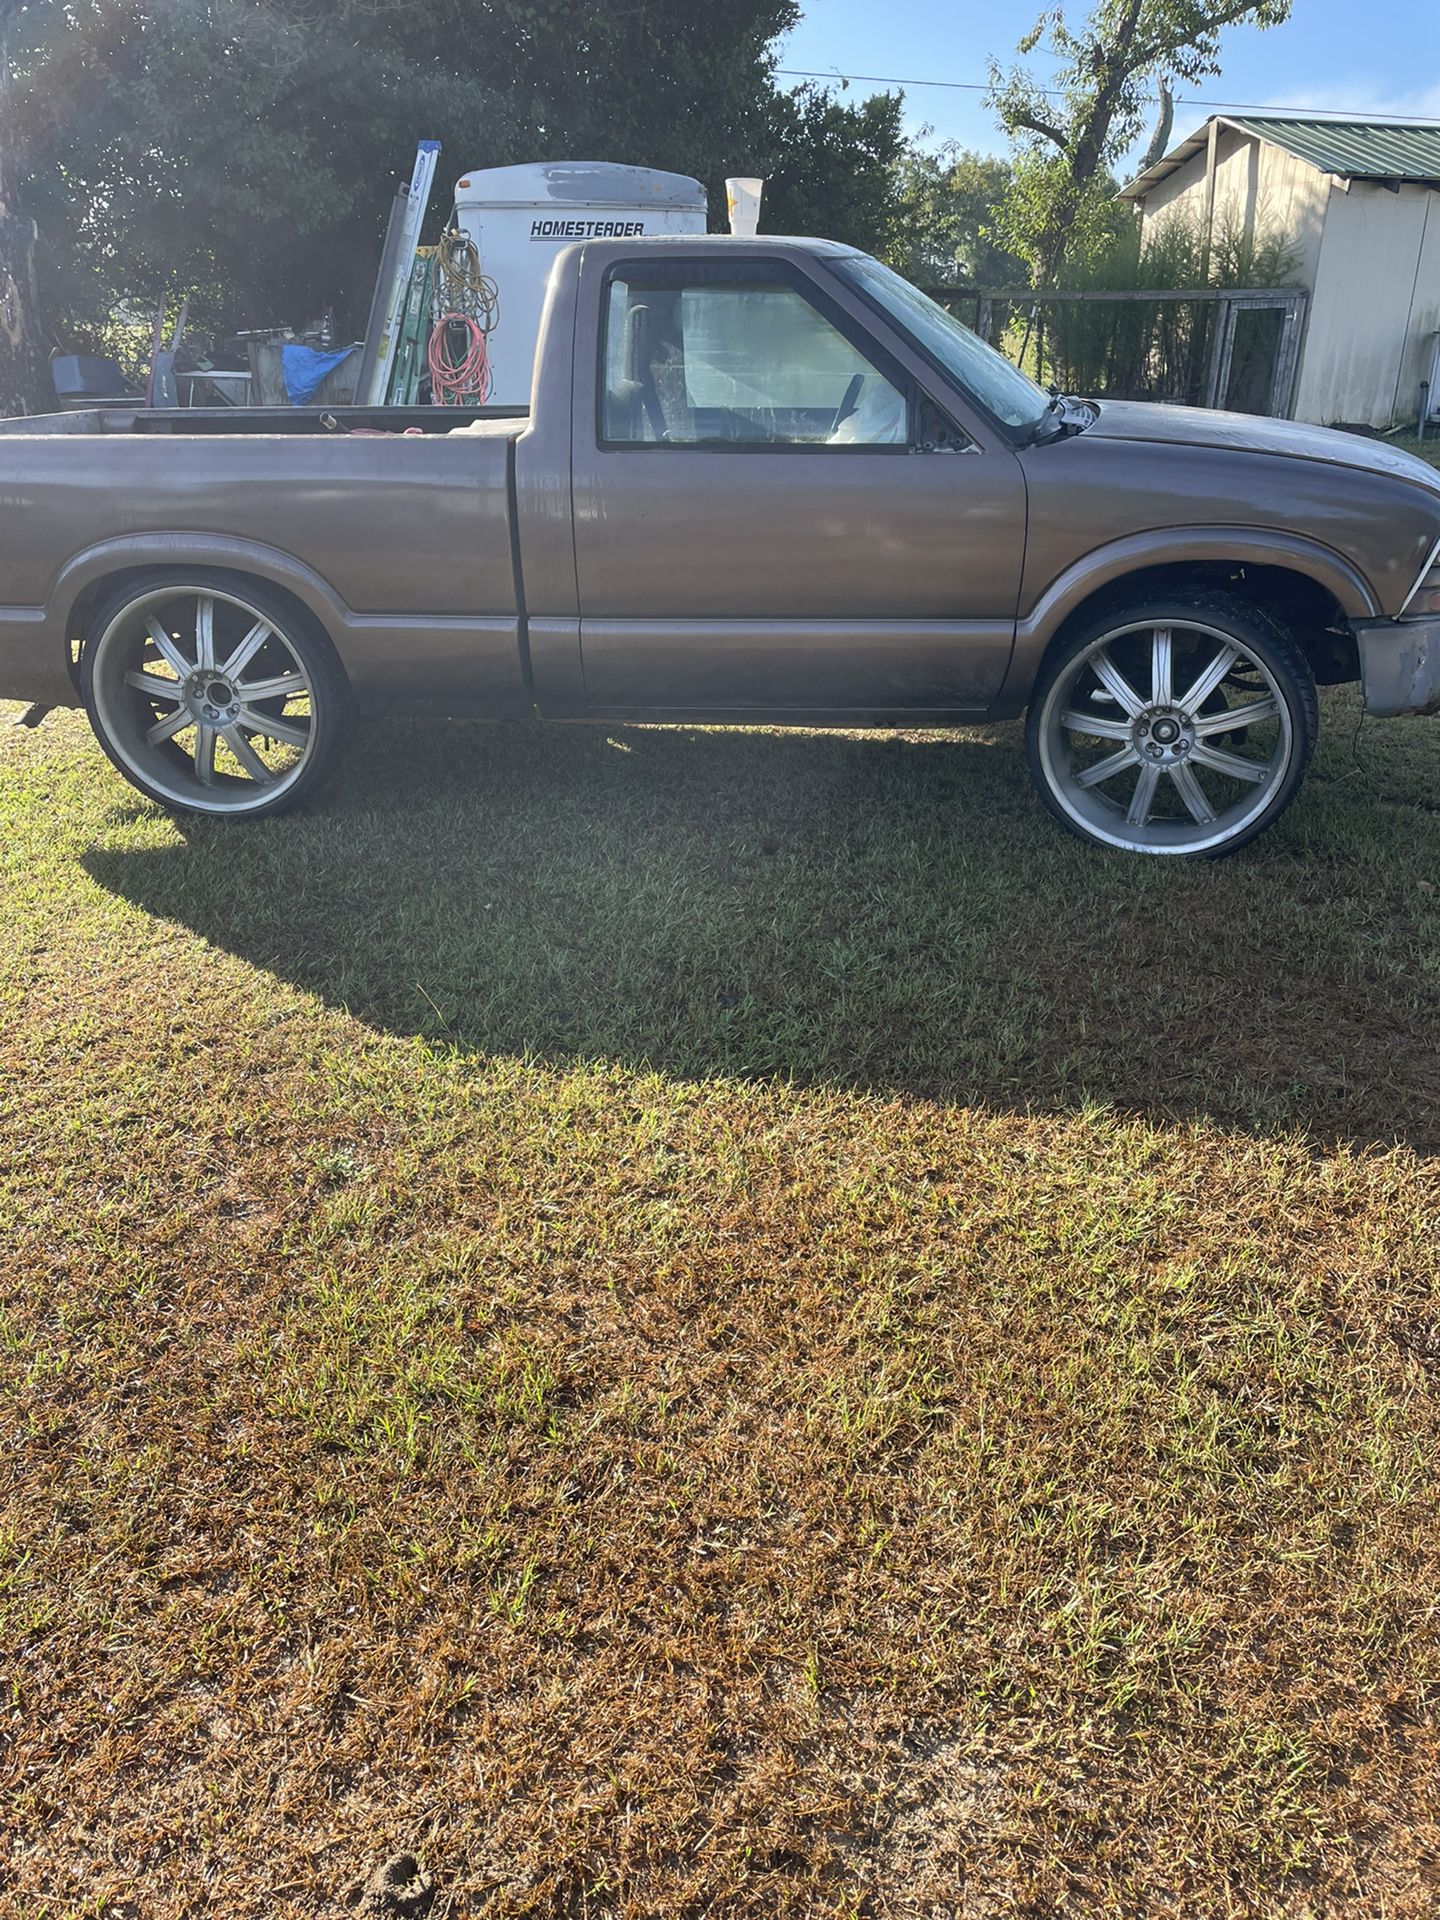 Shaved Doors For S 10  And Bed  Maybe Rims